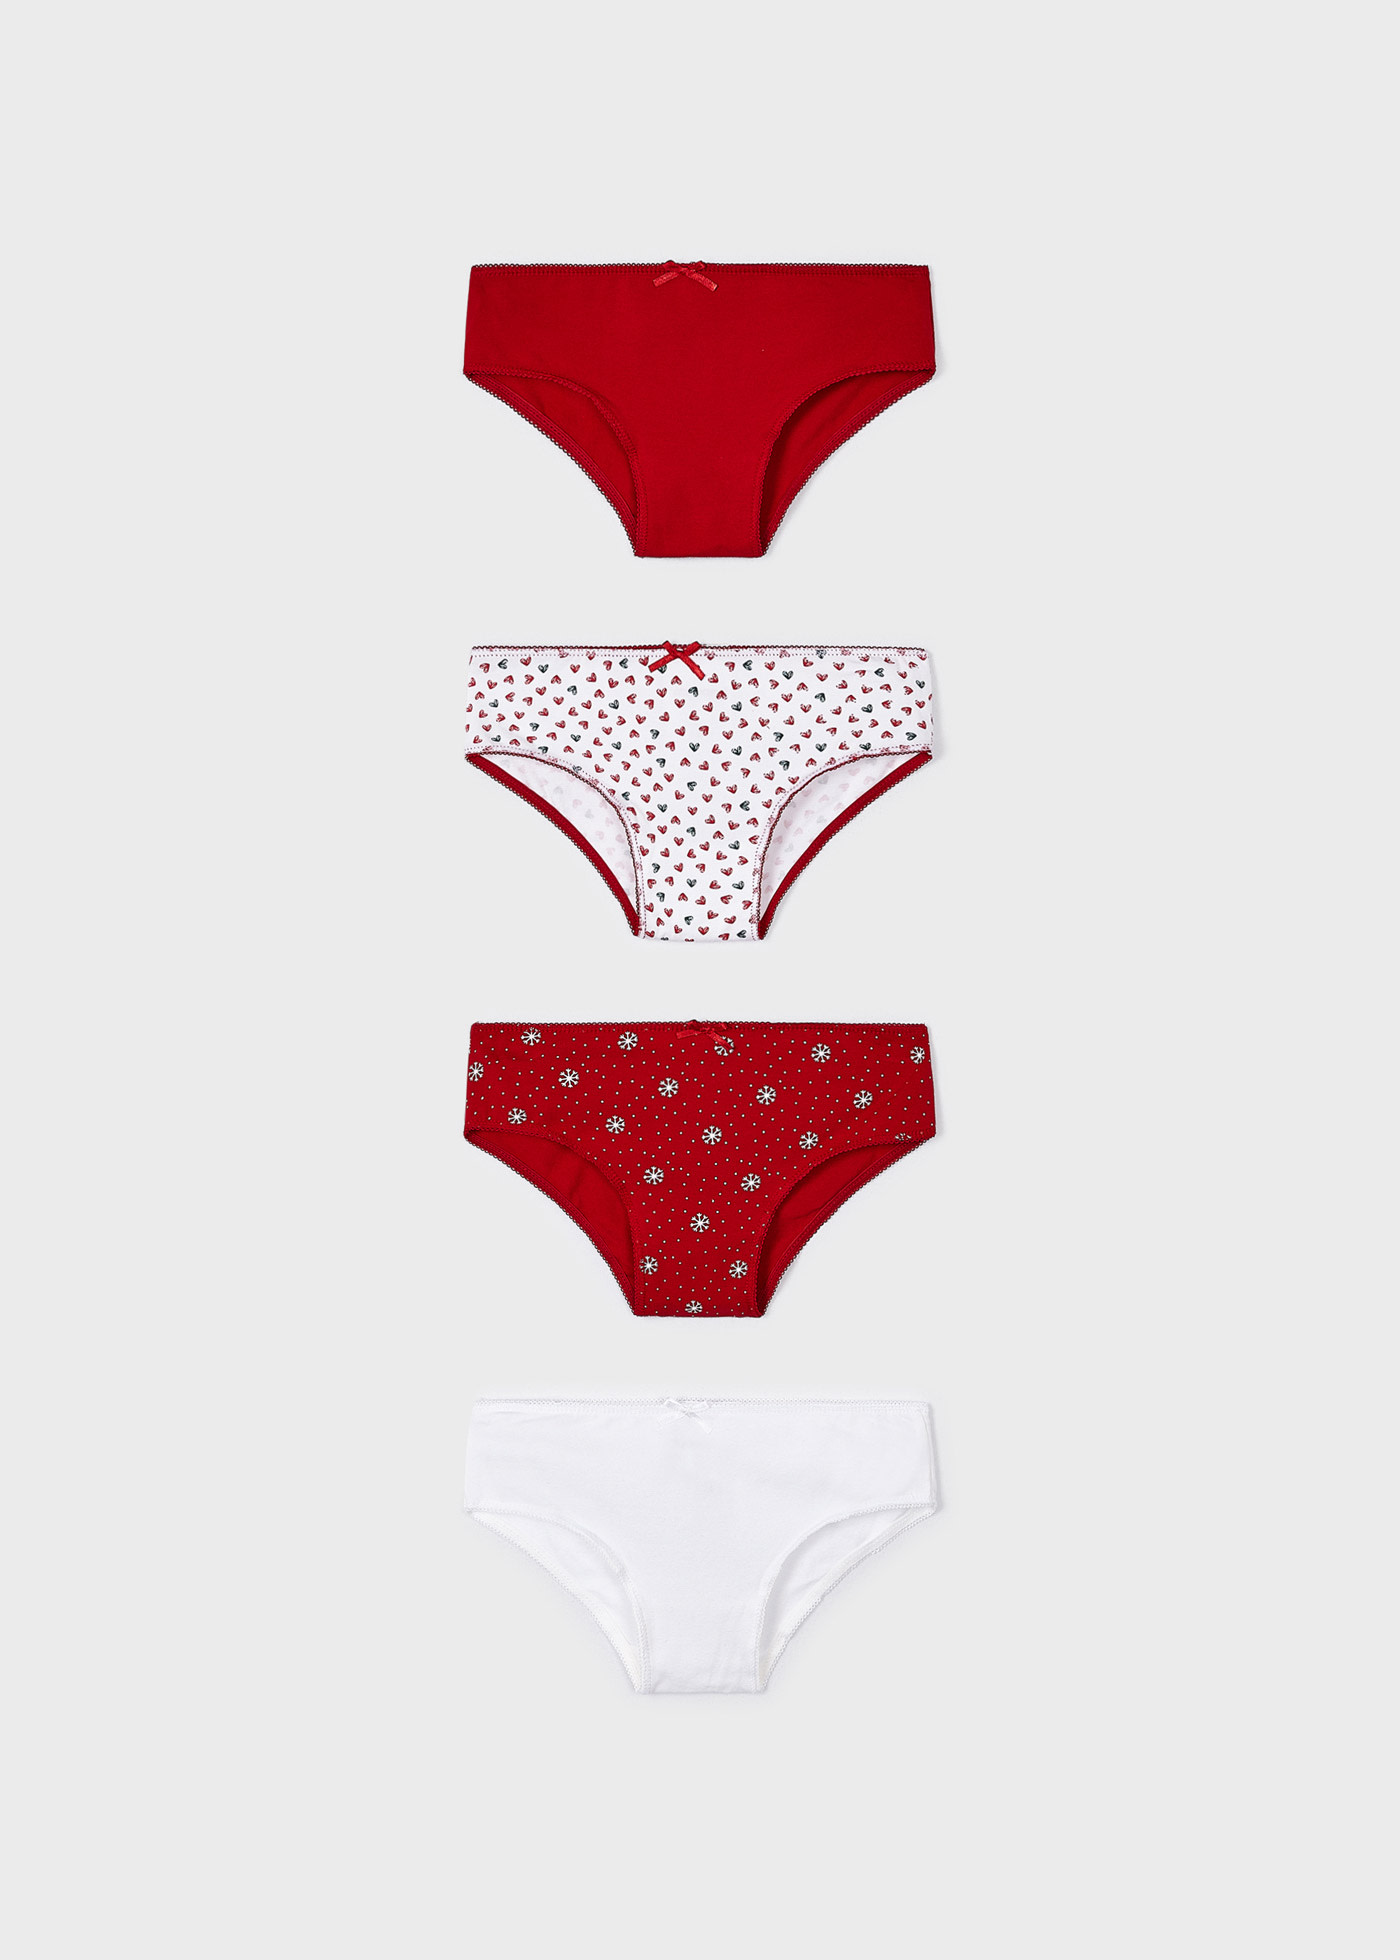 https://assets.mayoral.com/images/t_auto_img,f_auto,c_limit,w_1920/v1676899160/13-10560-022-XL-4/4-pack-brief-underwear-girl-red-XL-4.jpg